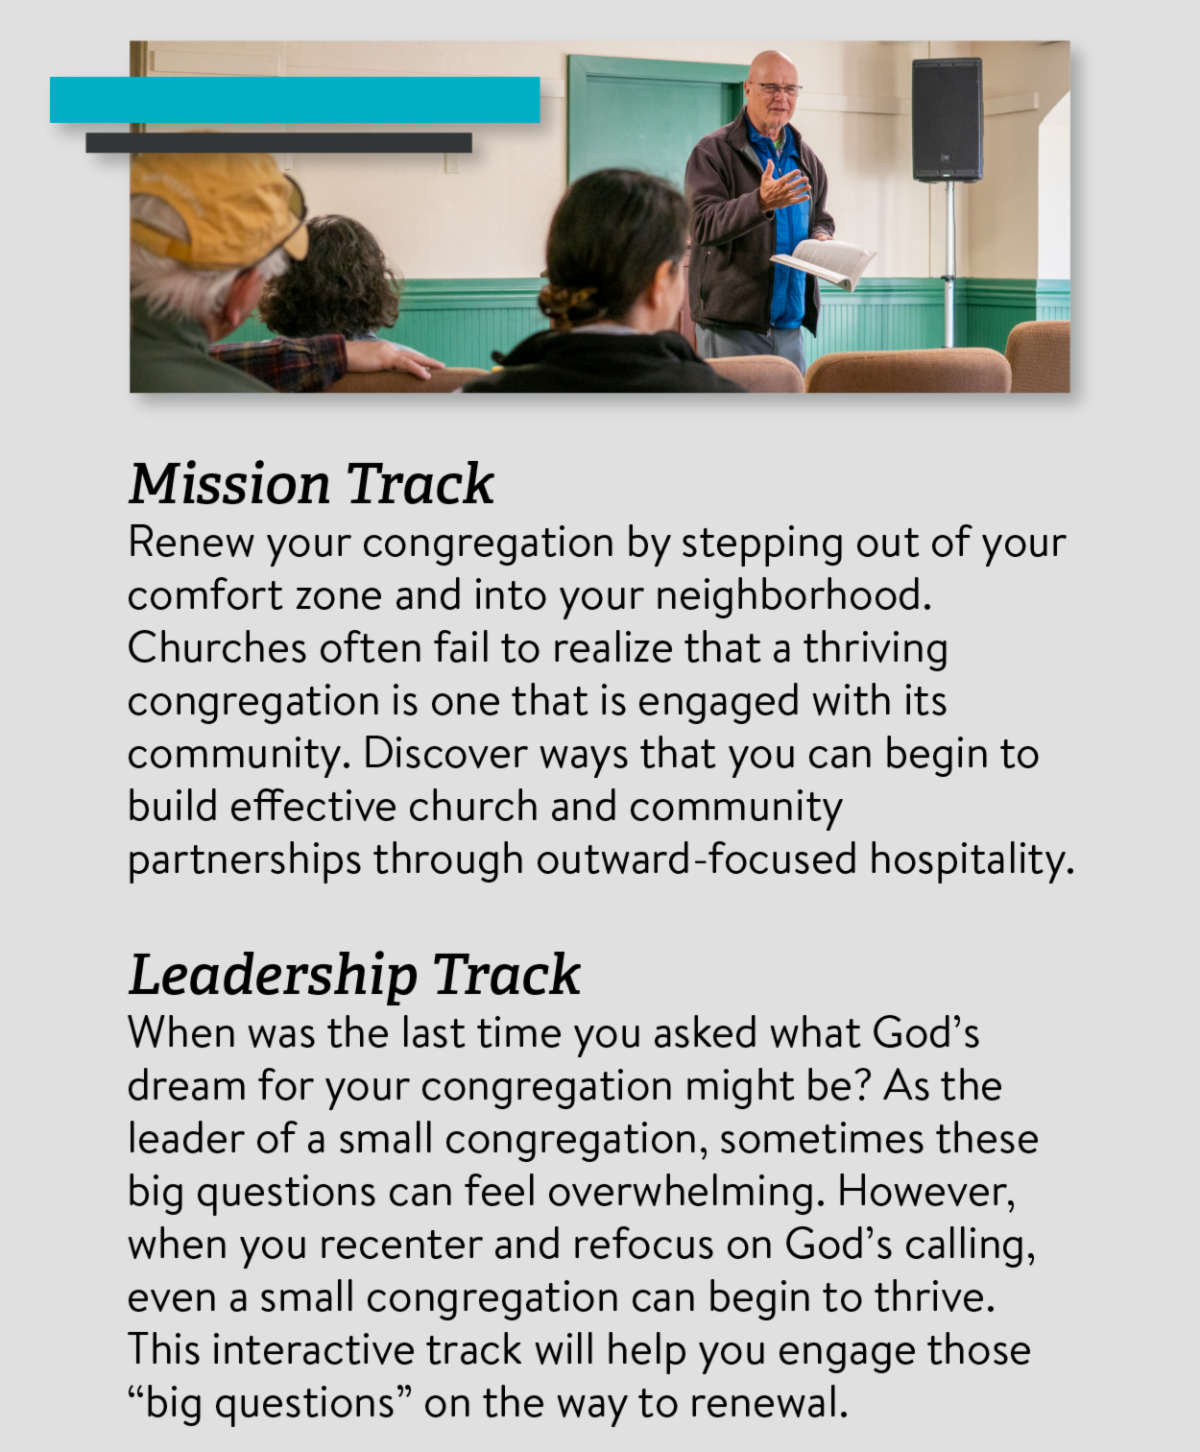 Mission Track Renew your congregation by stepping out of your comfort zone and into your neighborhood. Churches often fail to realize that a thriving congregation is one that is engaged with its community. Discover ways that you can begin to build effective church and community partnerships through outward-focused hospitality. Leadership Track When was the last time you asked what God’s dream for your congregation might be? As the leader of a small congregation, sometimes these big questions can feel overwhelming. However, when you recenter and refocus on God’s calling, even a small congregation can begin to thrive. This interactive track will help you engage those “big questions” on the way to renewal. 